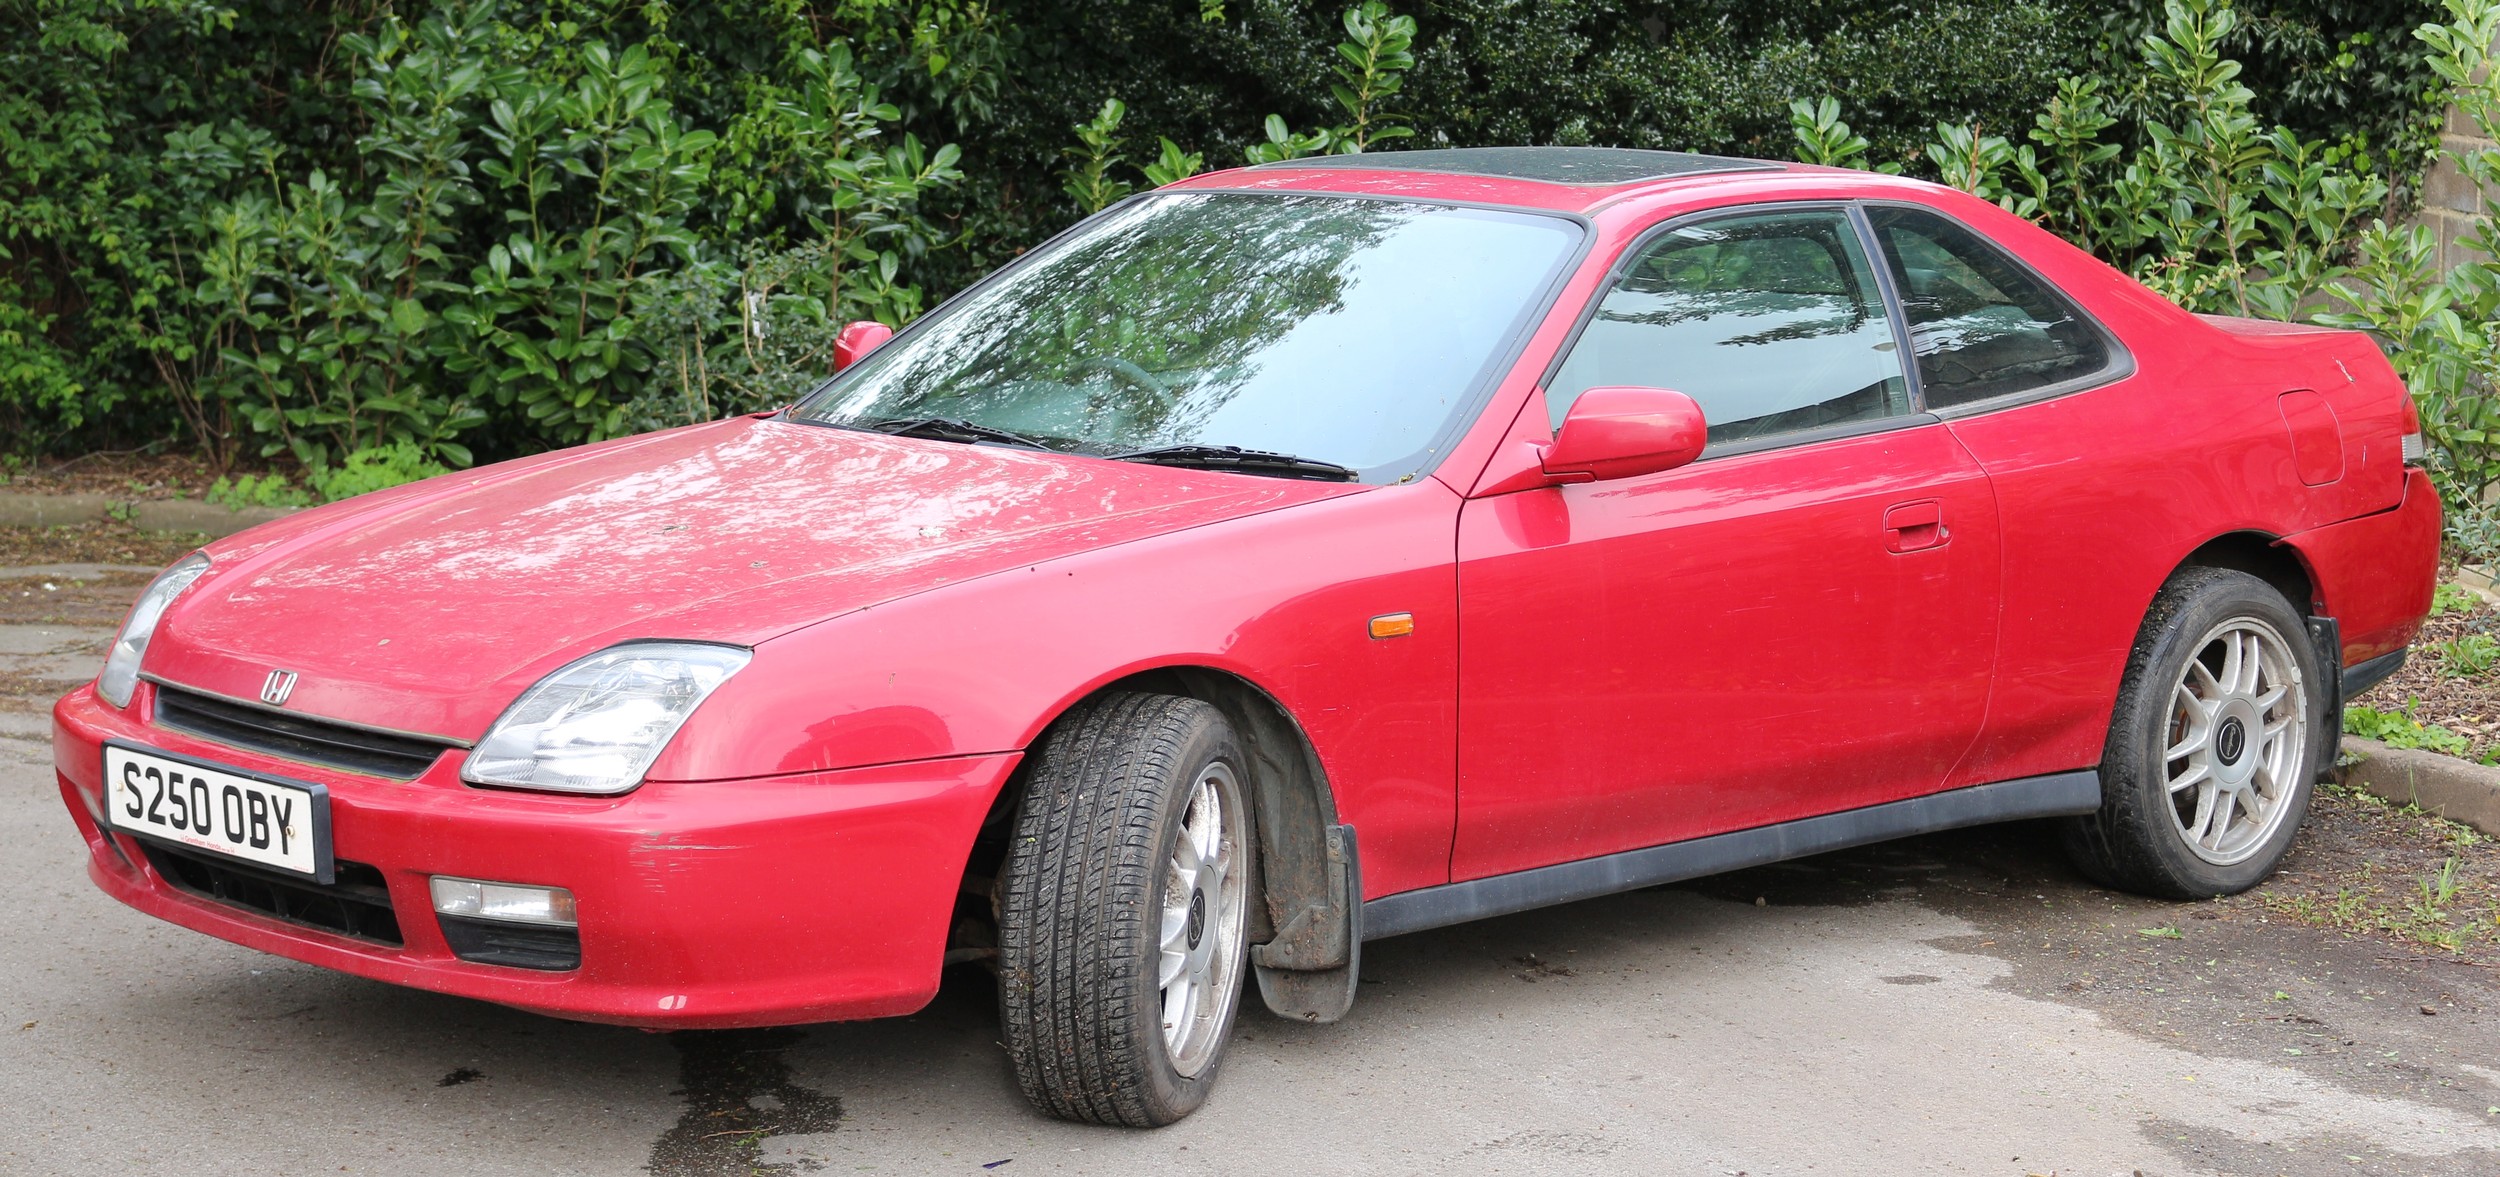 A Honda Prelude 2.0I two door saloon car in red, registration S250OBY, petrol, four speed - Image 2 of 9